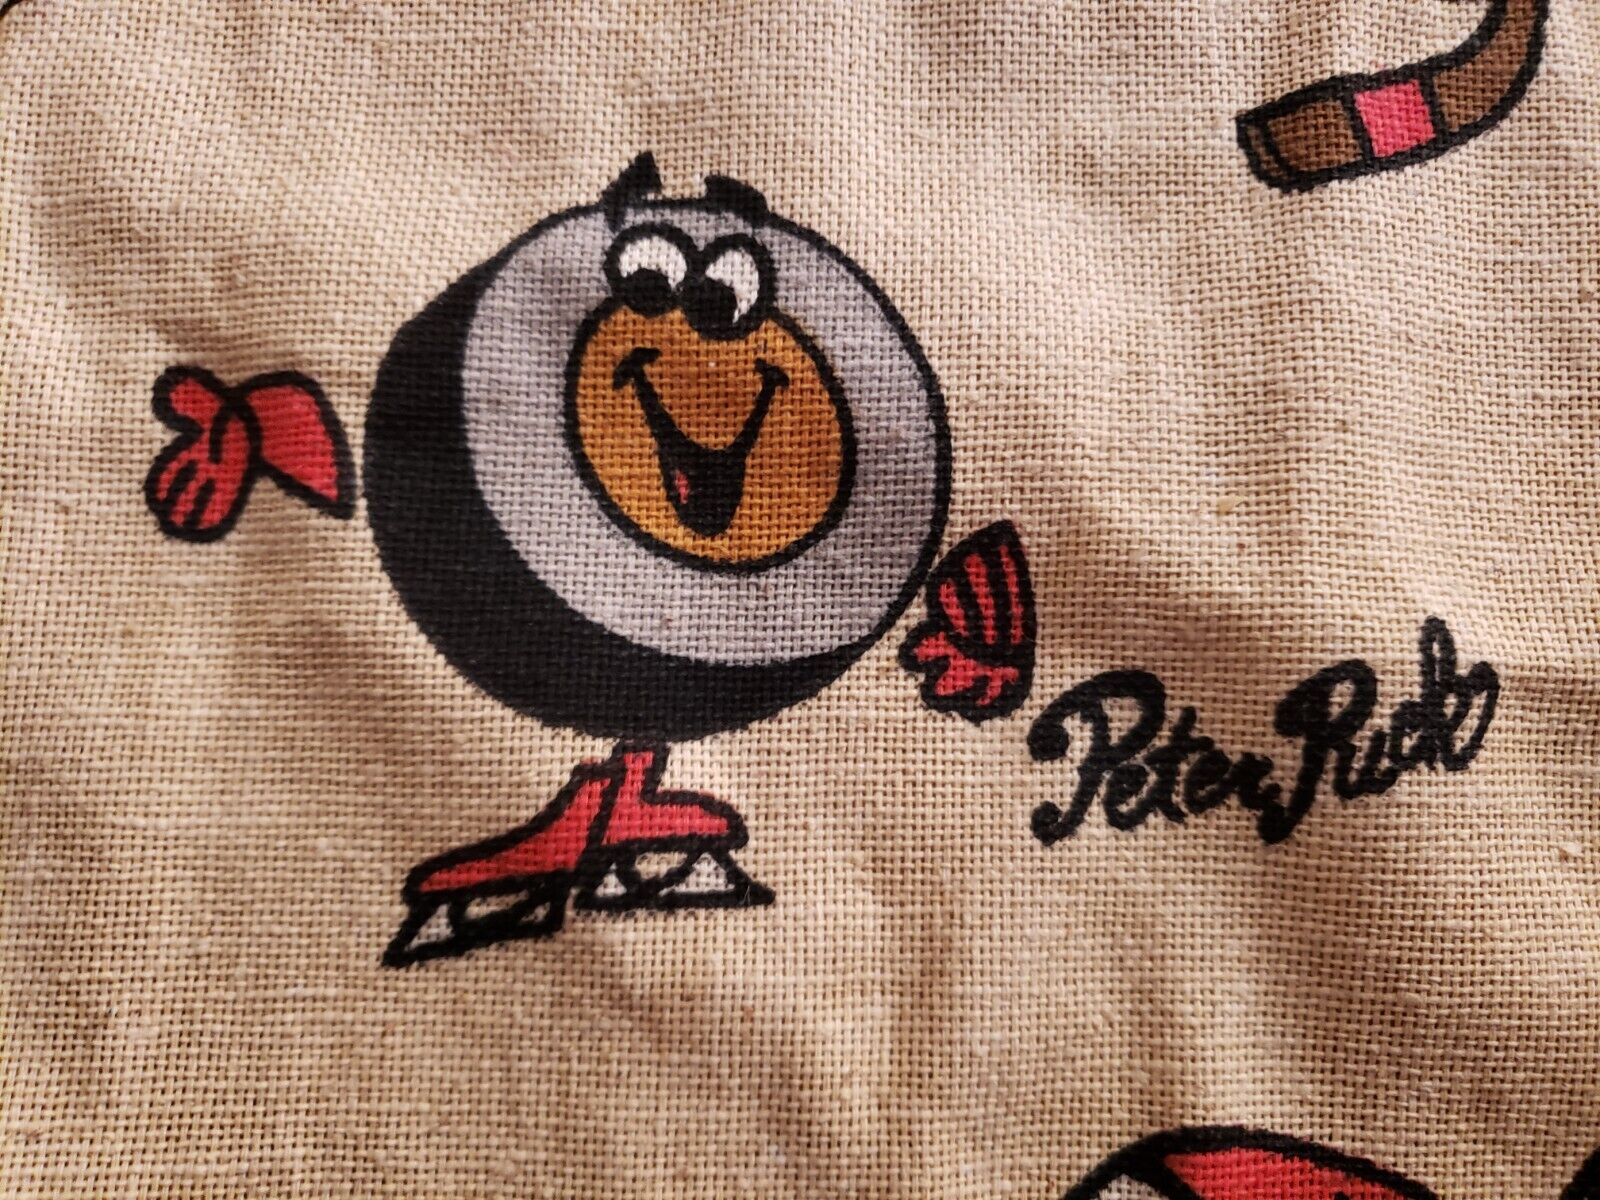 VINTAGE 1974 PETER PUCK HOCKEY CURTAINS - HEAVY DUTY 100% COTTON -  RARE